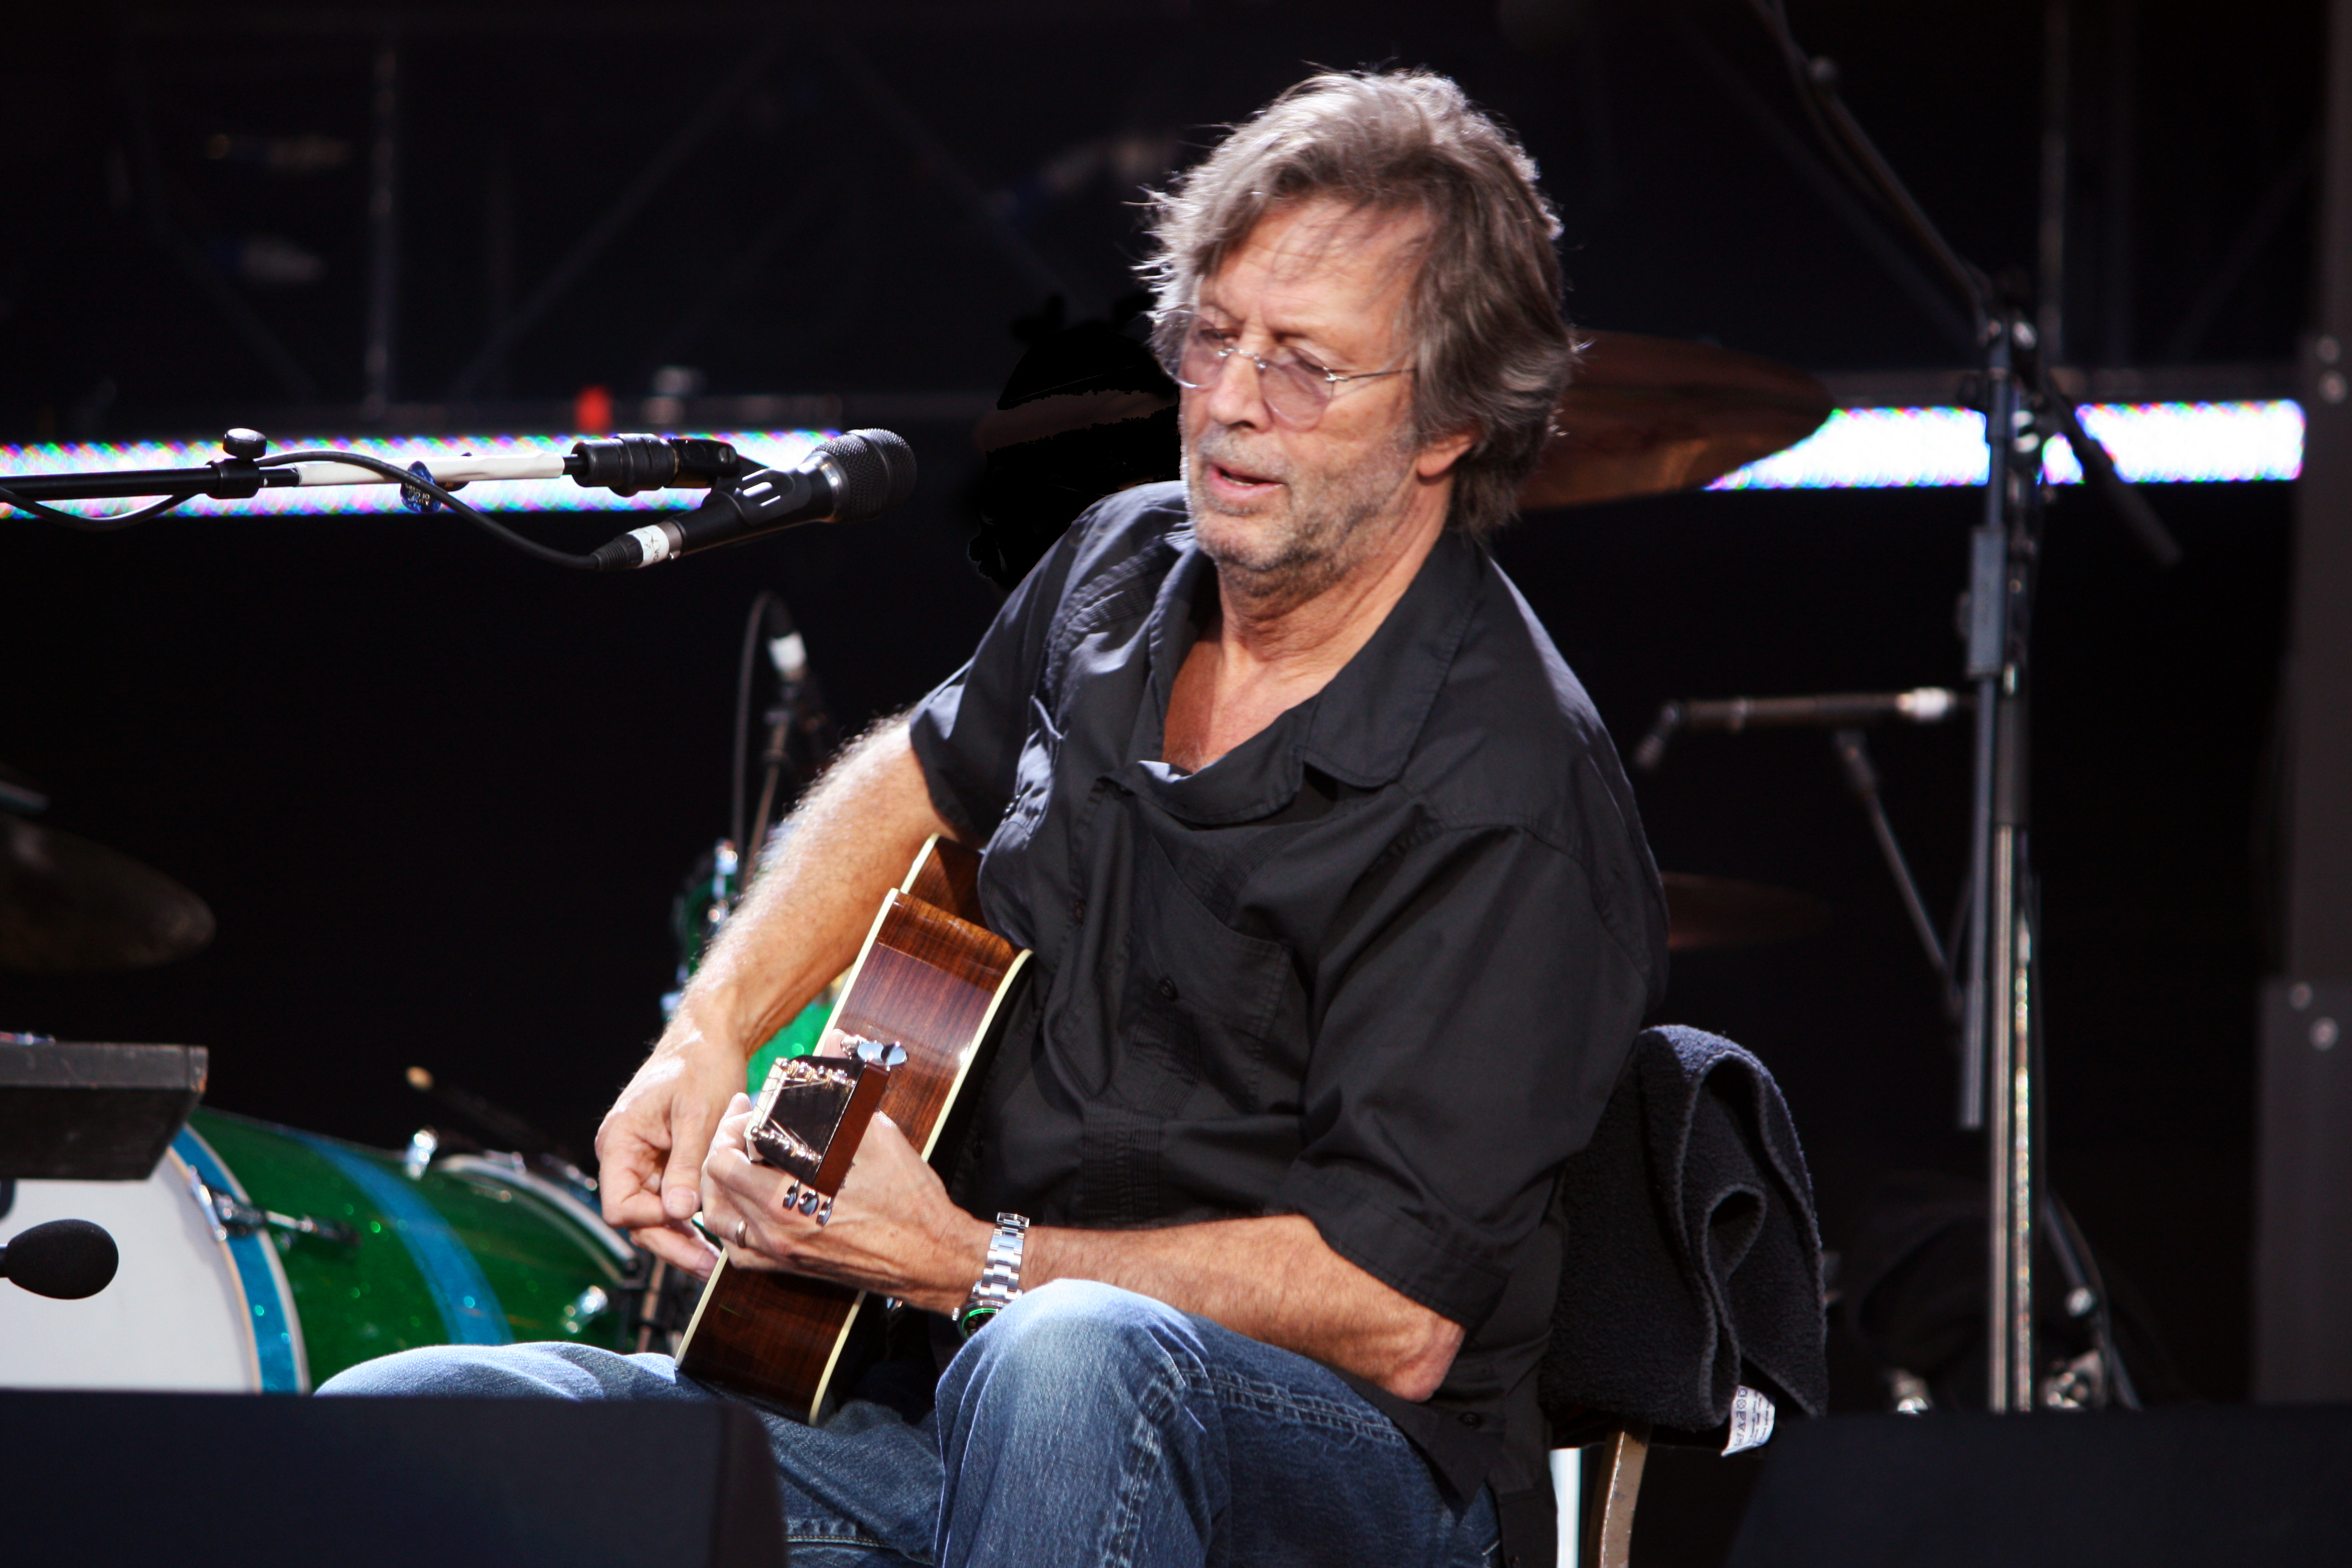 Eric Clapton Wallpaper Image Photos Pictures Background